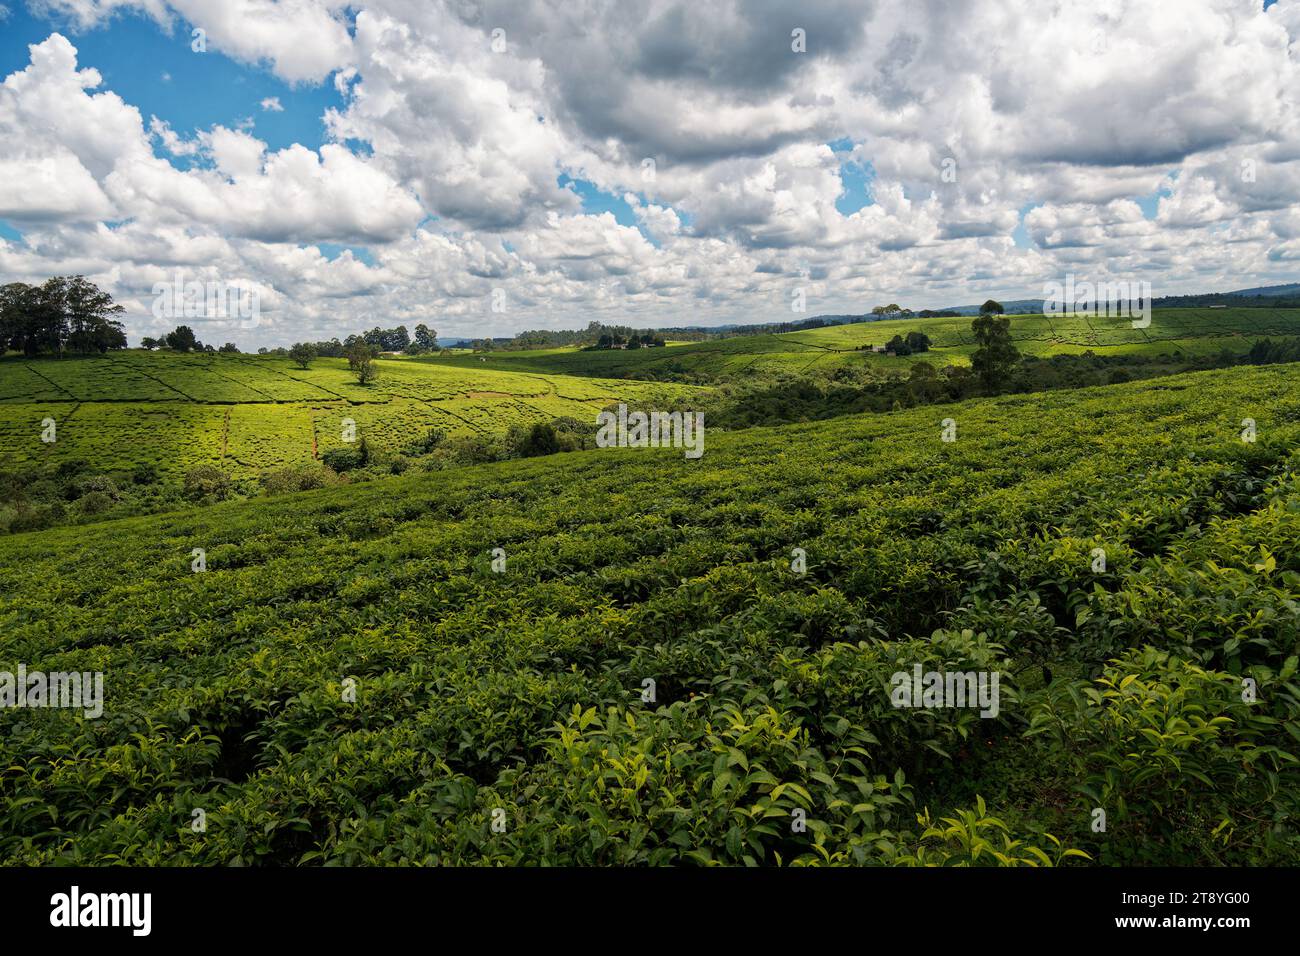 Landscape of Tea plantation in Uganda Africa, green fields with tea plant, detail of tea plant, blue sky with clouds, important export product. Stock Photo